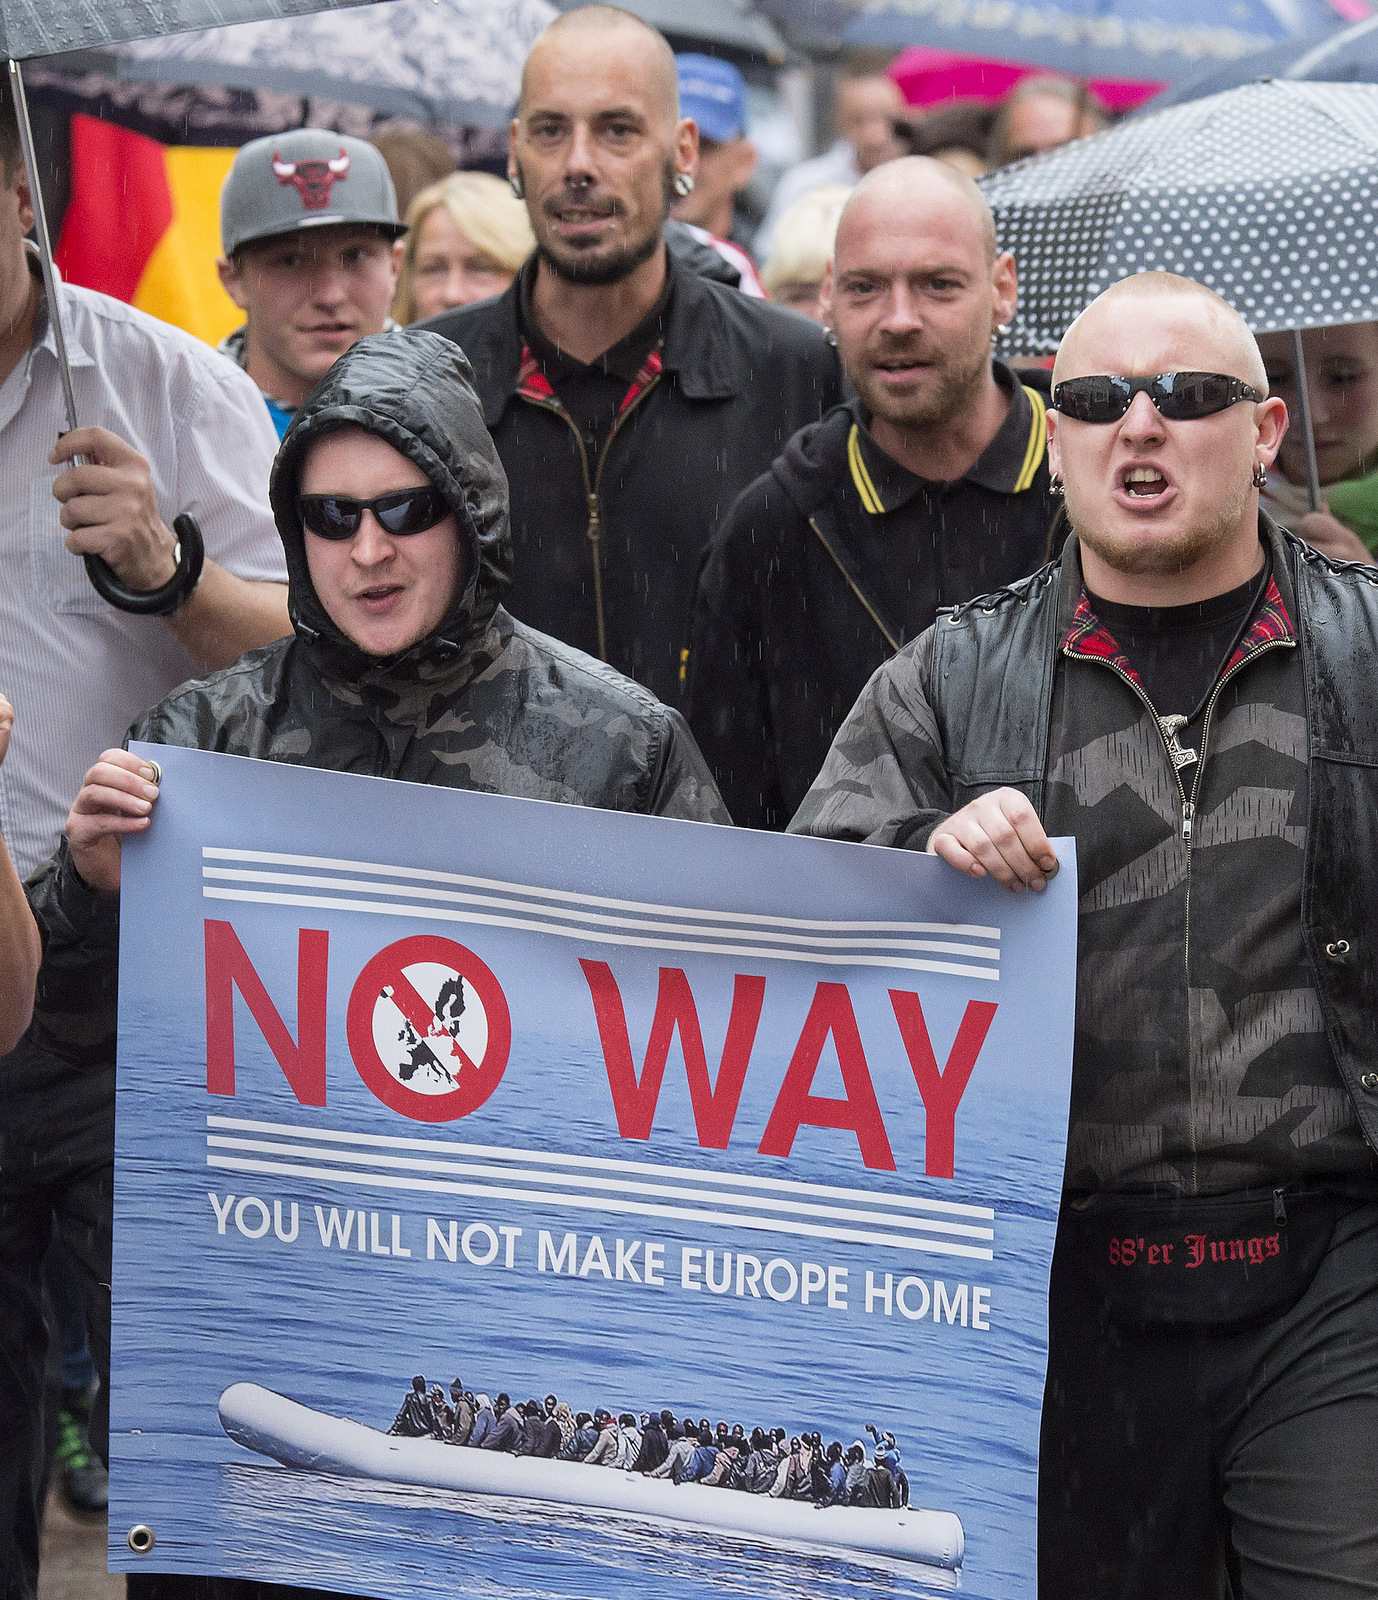 People take part at a demonstration initiated by right-wing NPD (National Democratic Party of Germany) against the German asylum law and asylum seekers in Riesa, eastern Germany, Tuesday, Aug. 18, 2015. (AP/Jens Meyer)